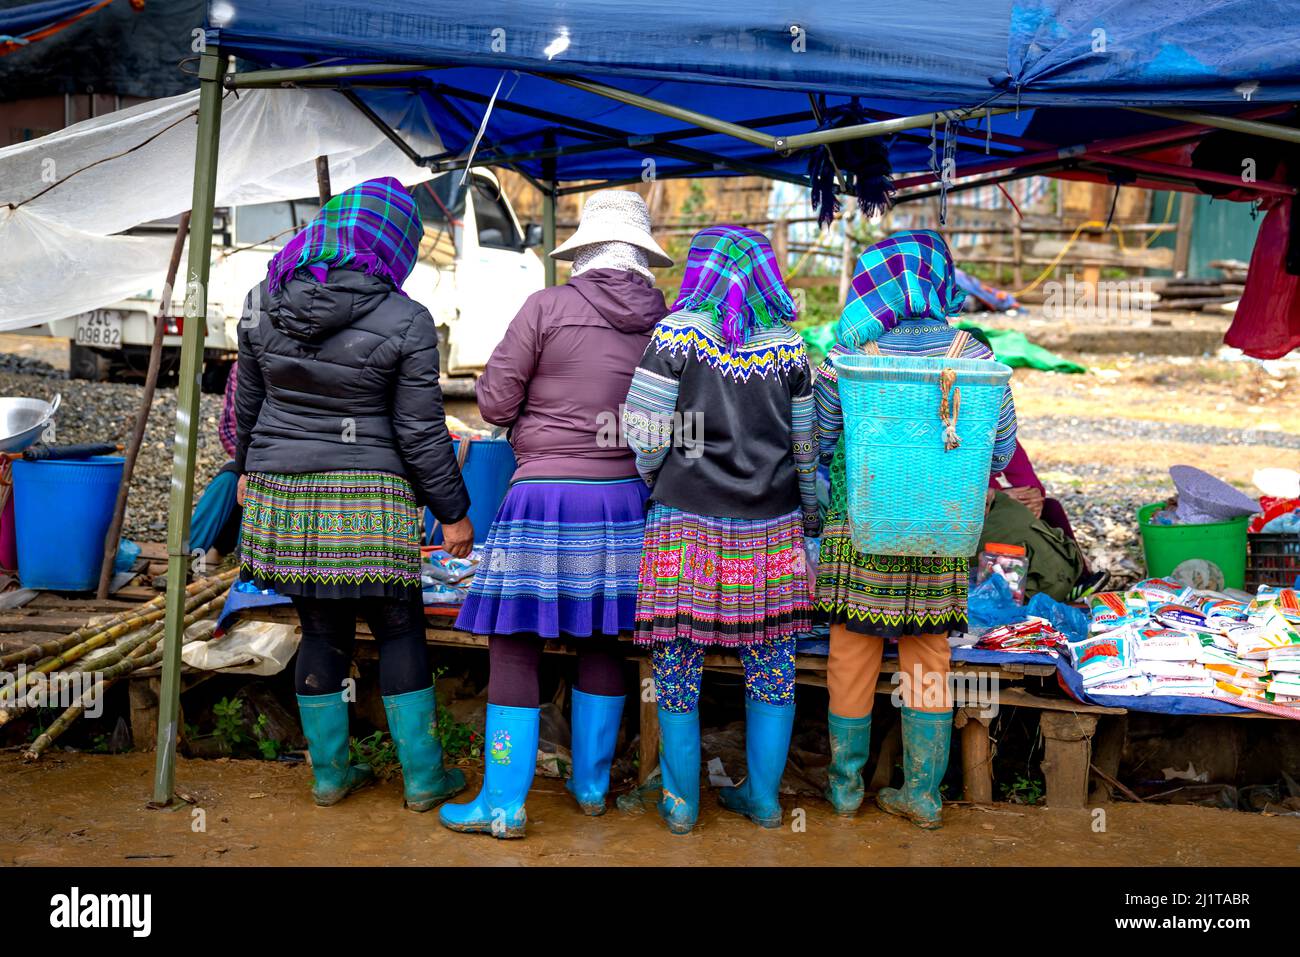 Can Cau Market, Bac Ha Town, Lao Cai Province, Vietnam - February 19, 2022: Scenes of buying and selling by ethnic minorities in Can Cau market, Bac H Stock Photo